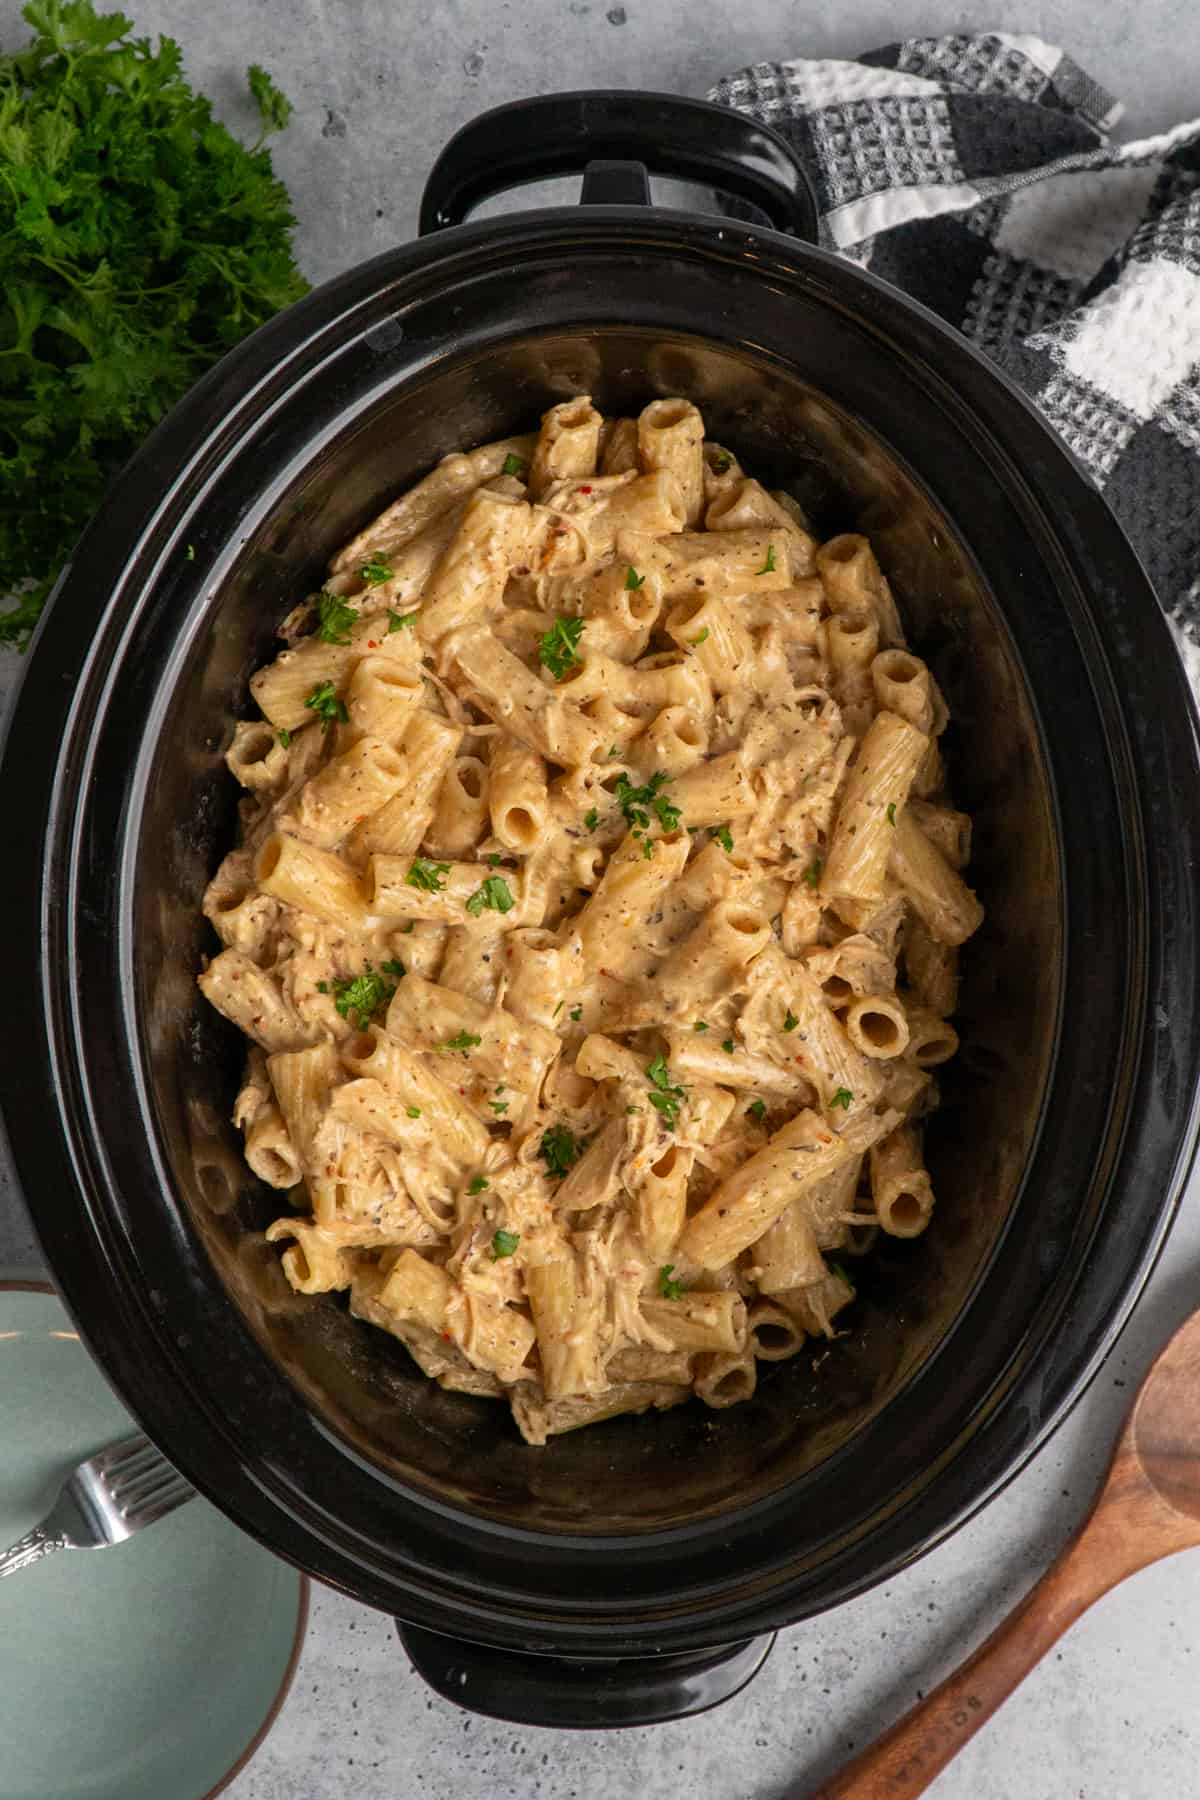 Overhead look at garlic parmesan chicken pasta in a slow cooker.